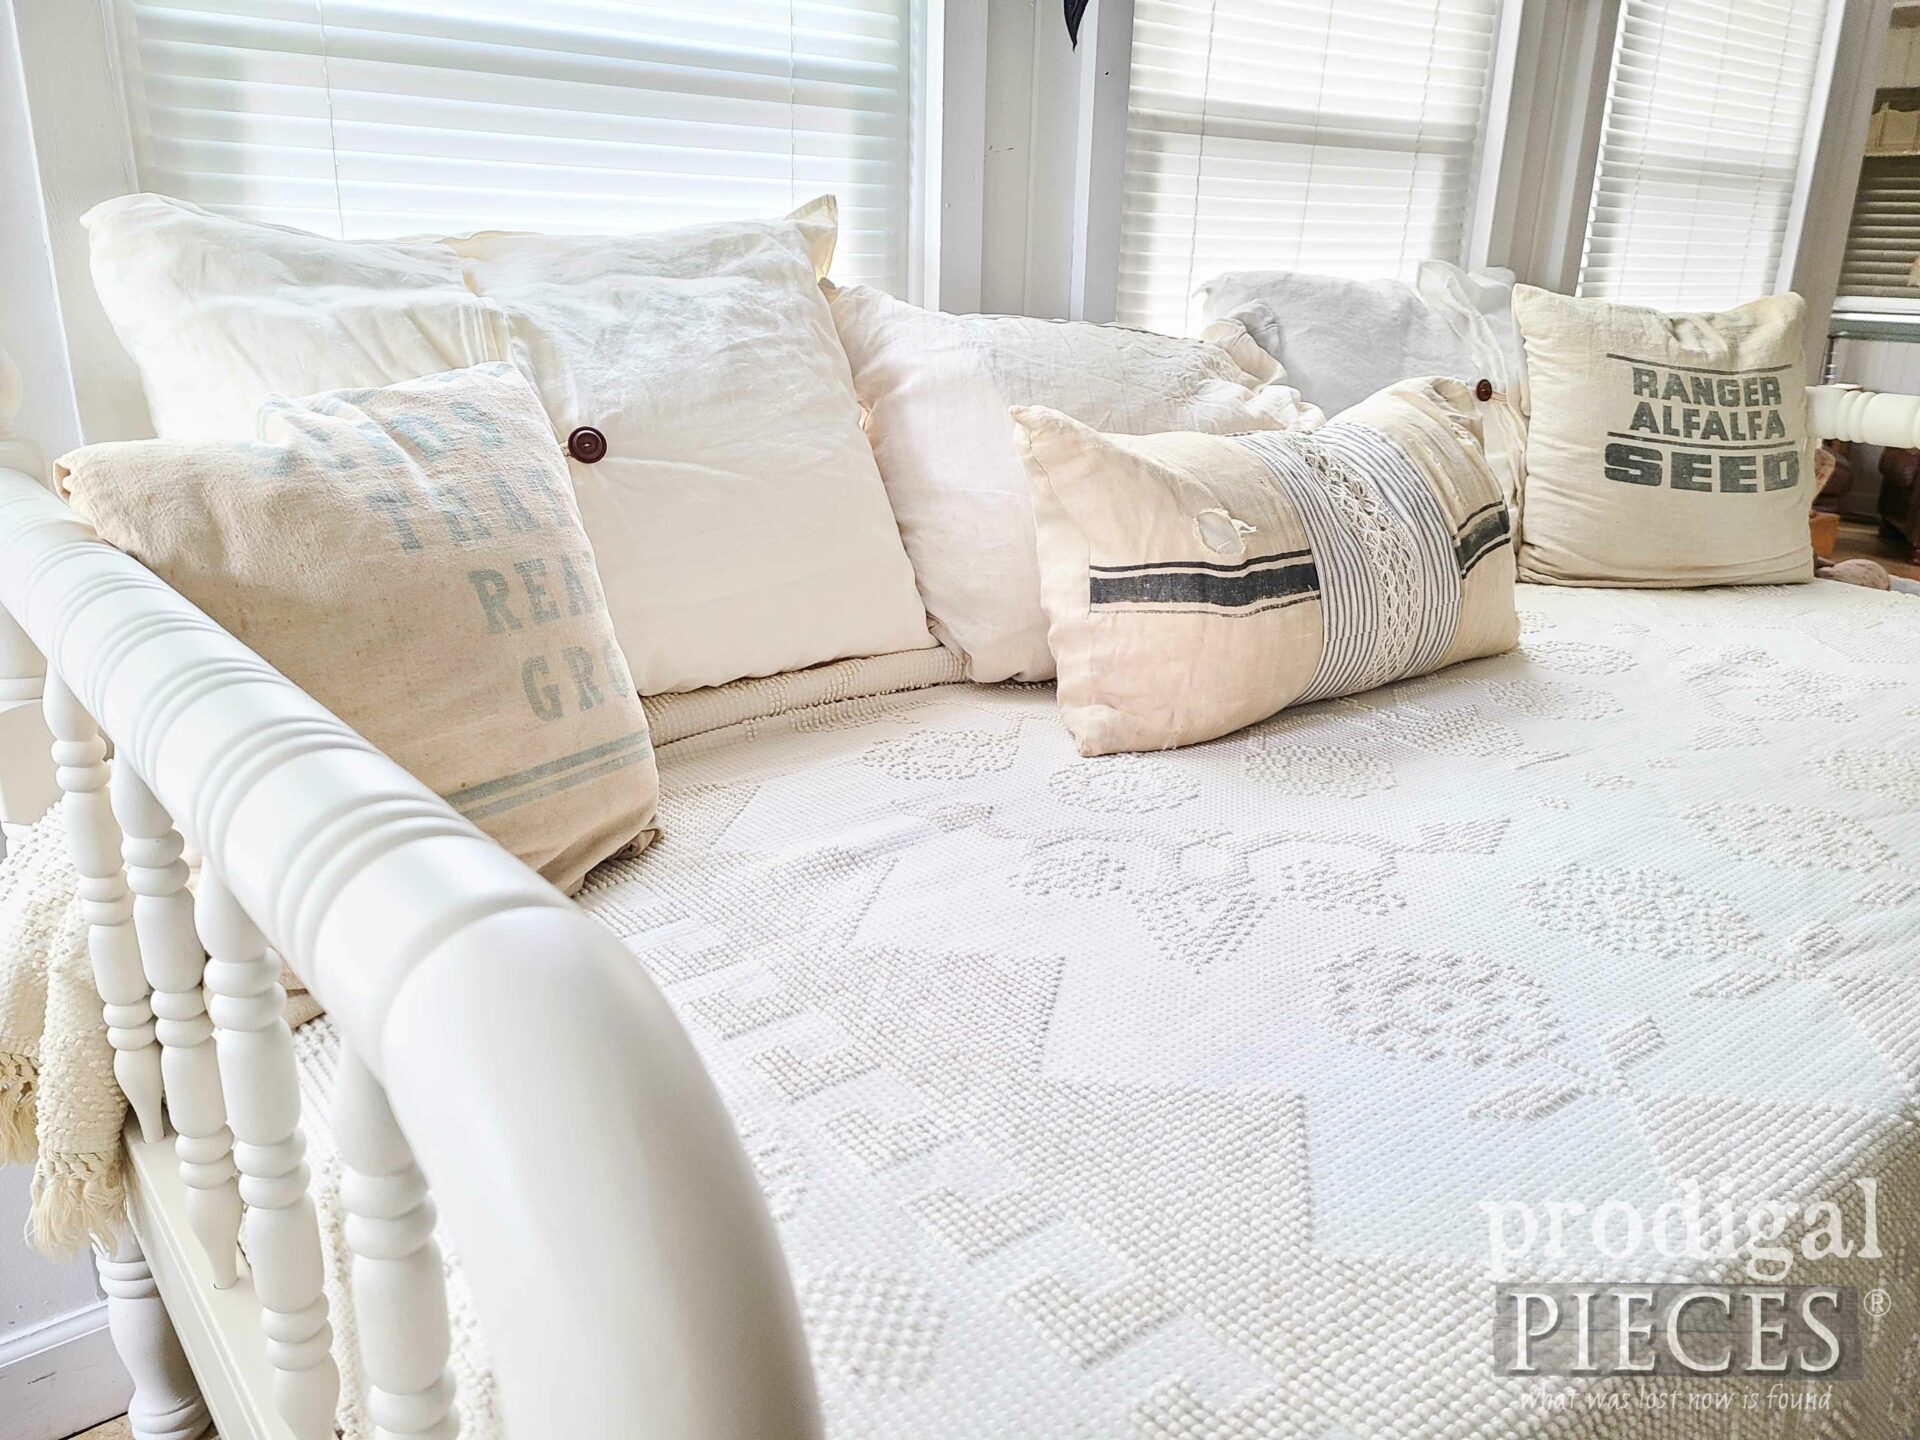 Farmhouse Style Bedding on DIY Daybed by Larissa of Prodigal Pieces | prodigalpieces.com #prodigalpieces #farmhouse #bedding